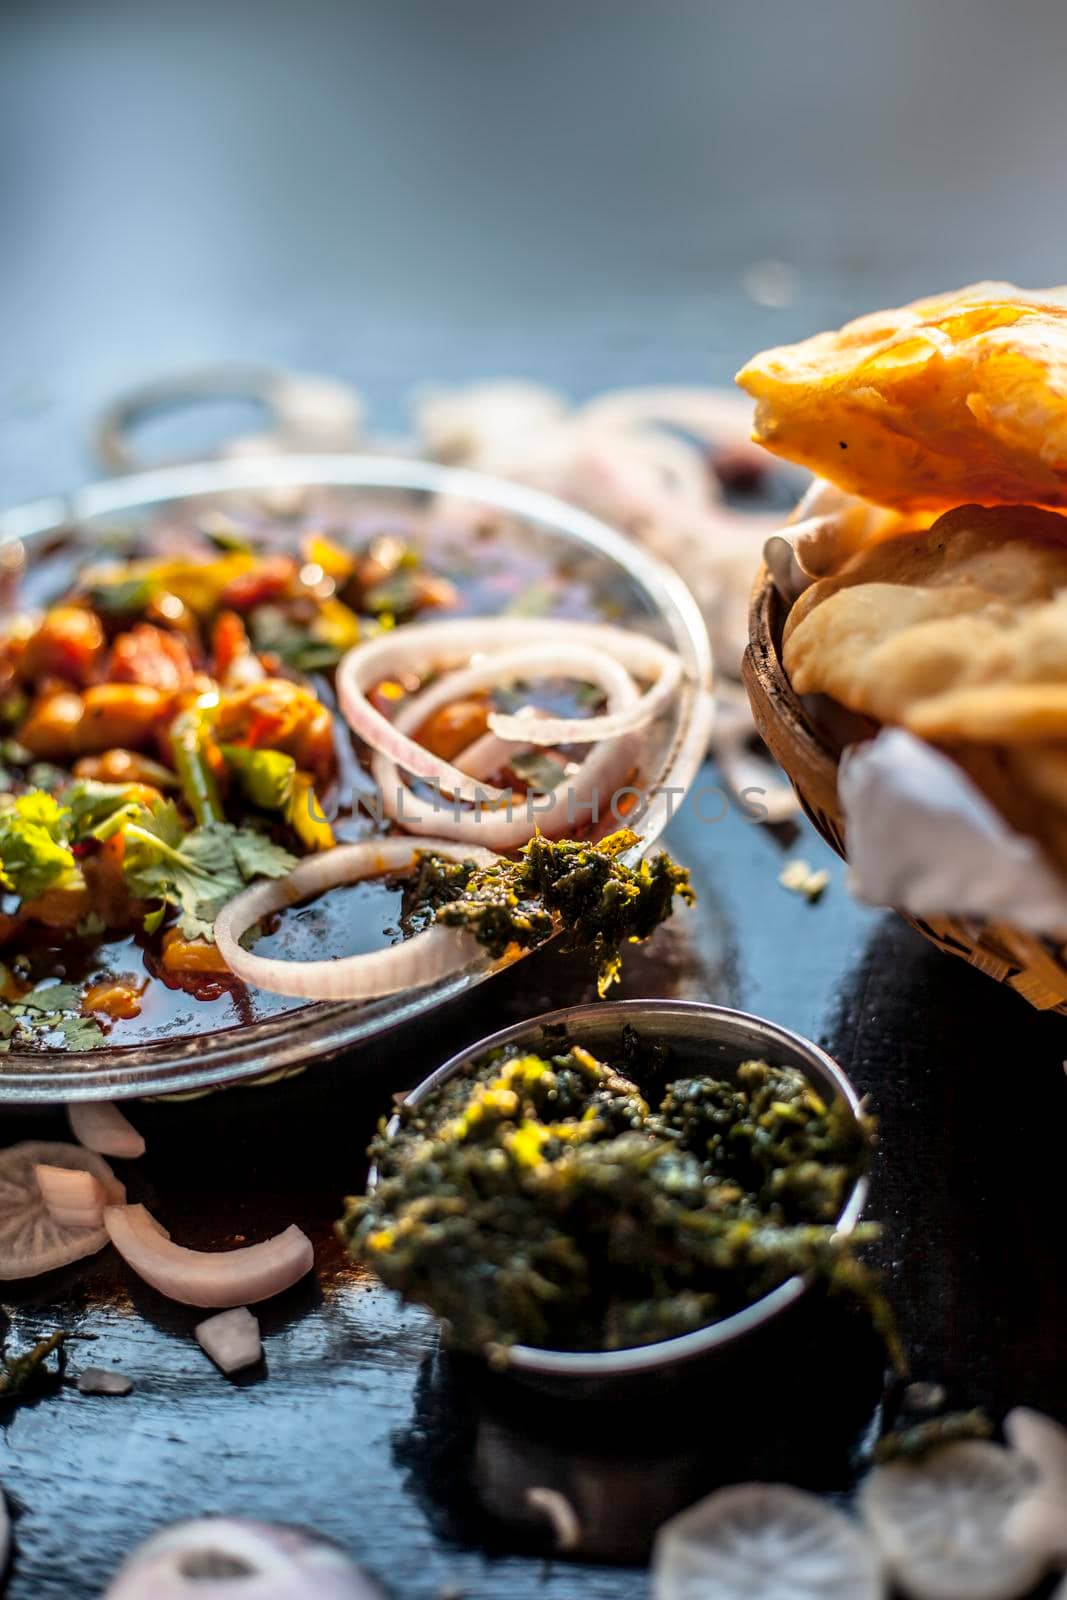 Full breakfast plate on the black surface. Indian Delhi style Chole bhature along with some onion rings and pudhina/mint chutney on a black surface. by mirzamlk